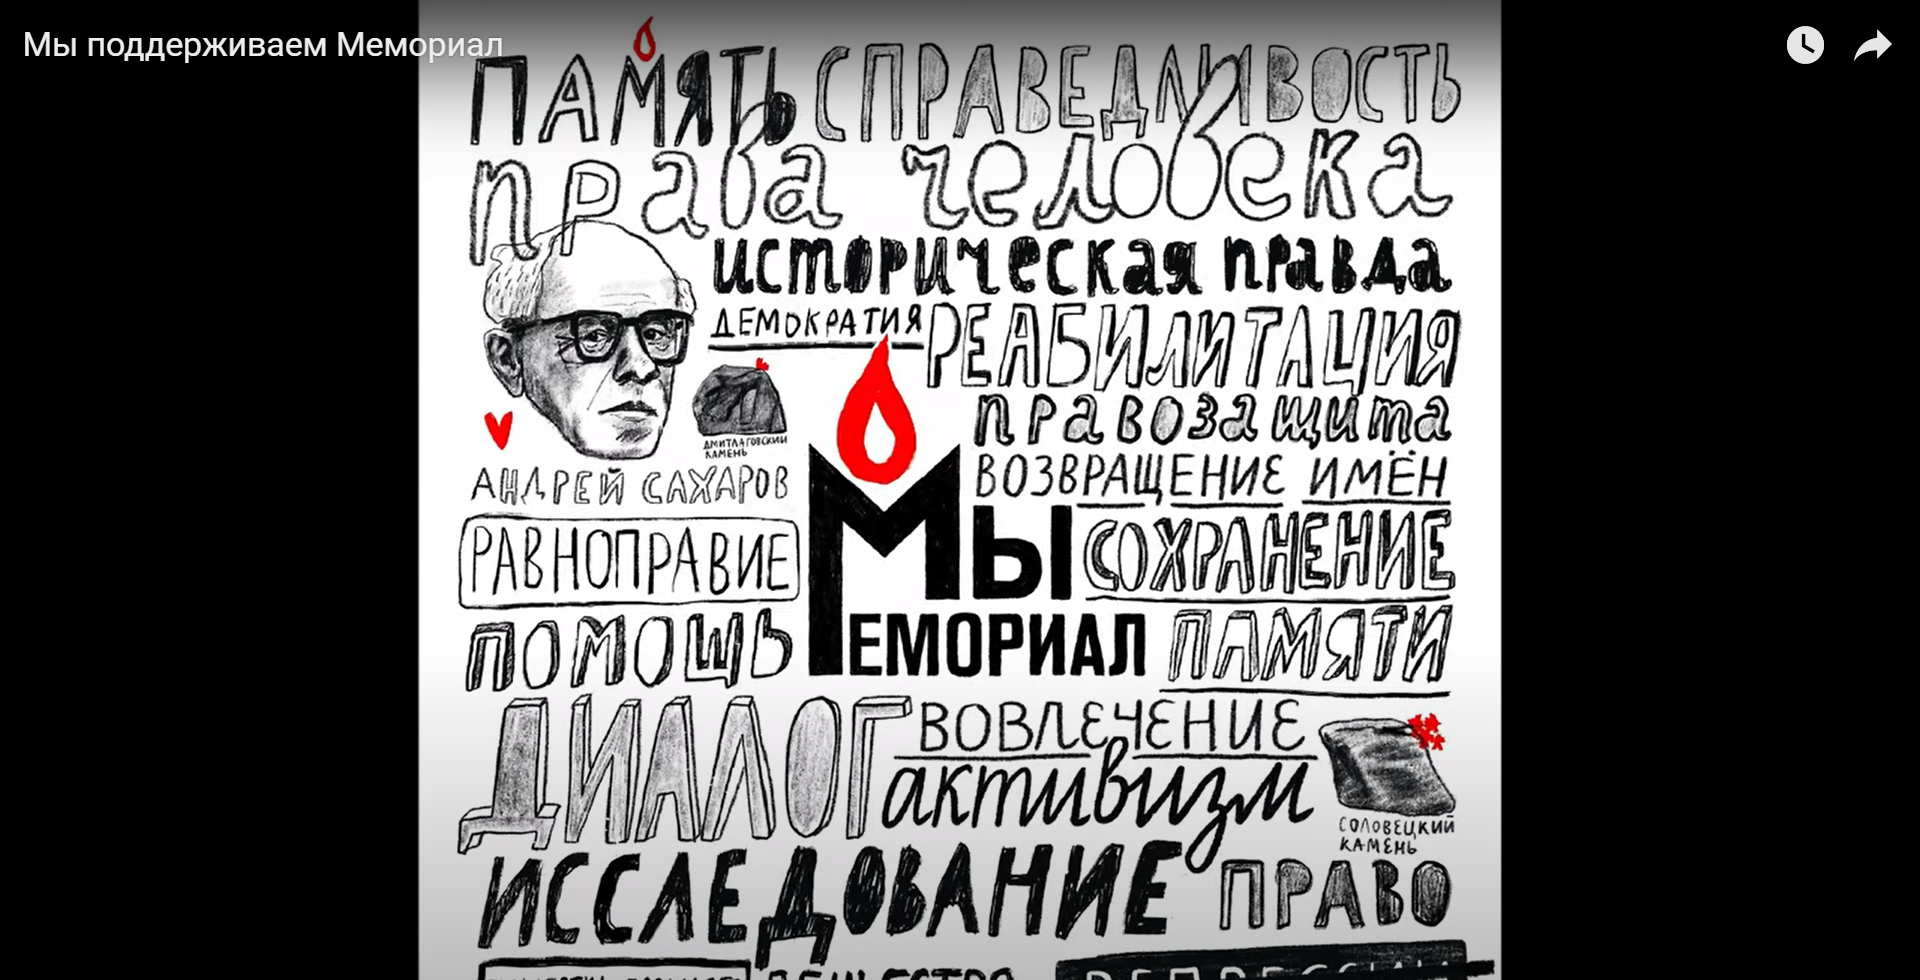 33,600 words of support. Trial for the destruction of Memorial HRC* is underway in Moscow